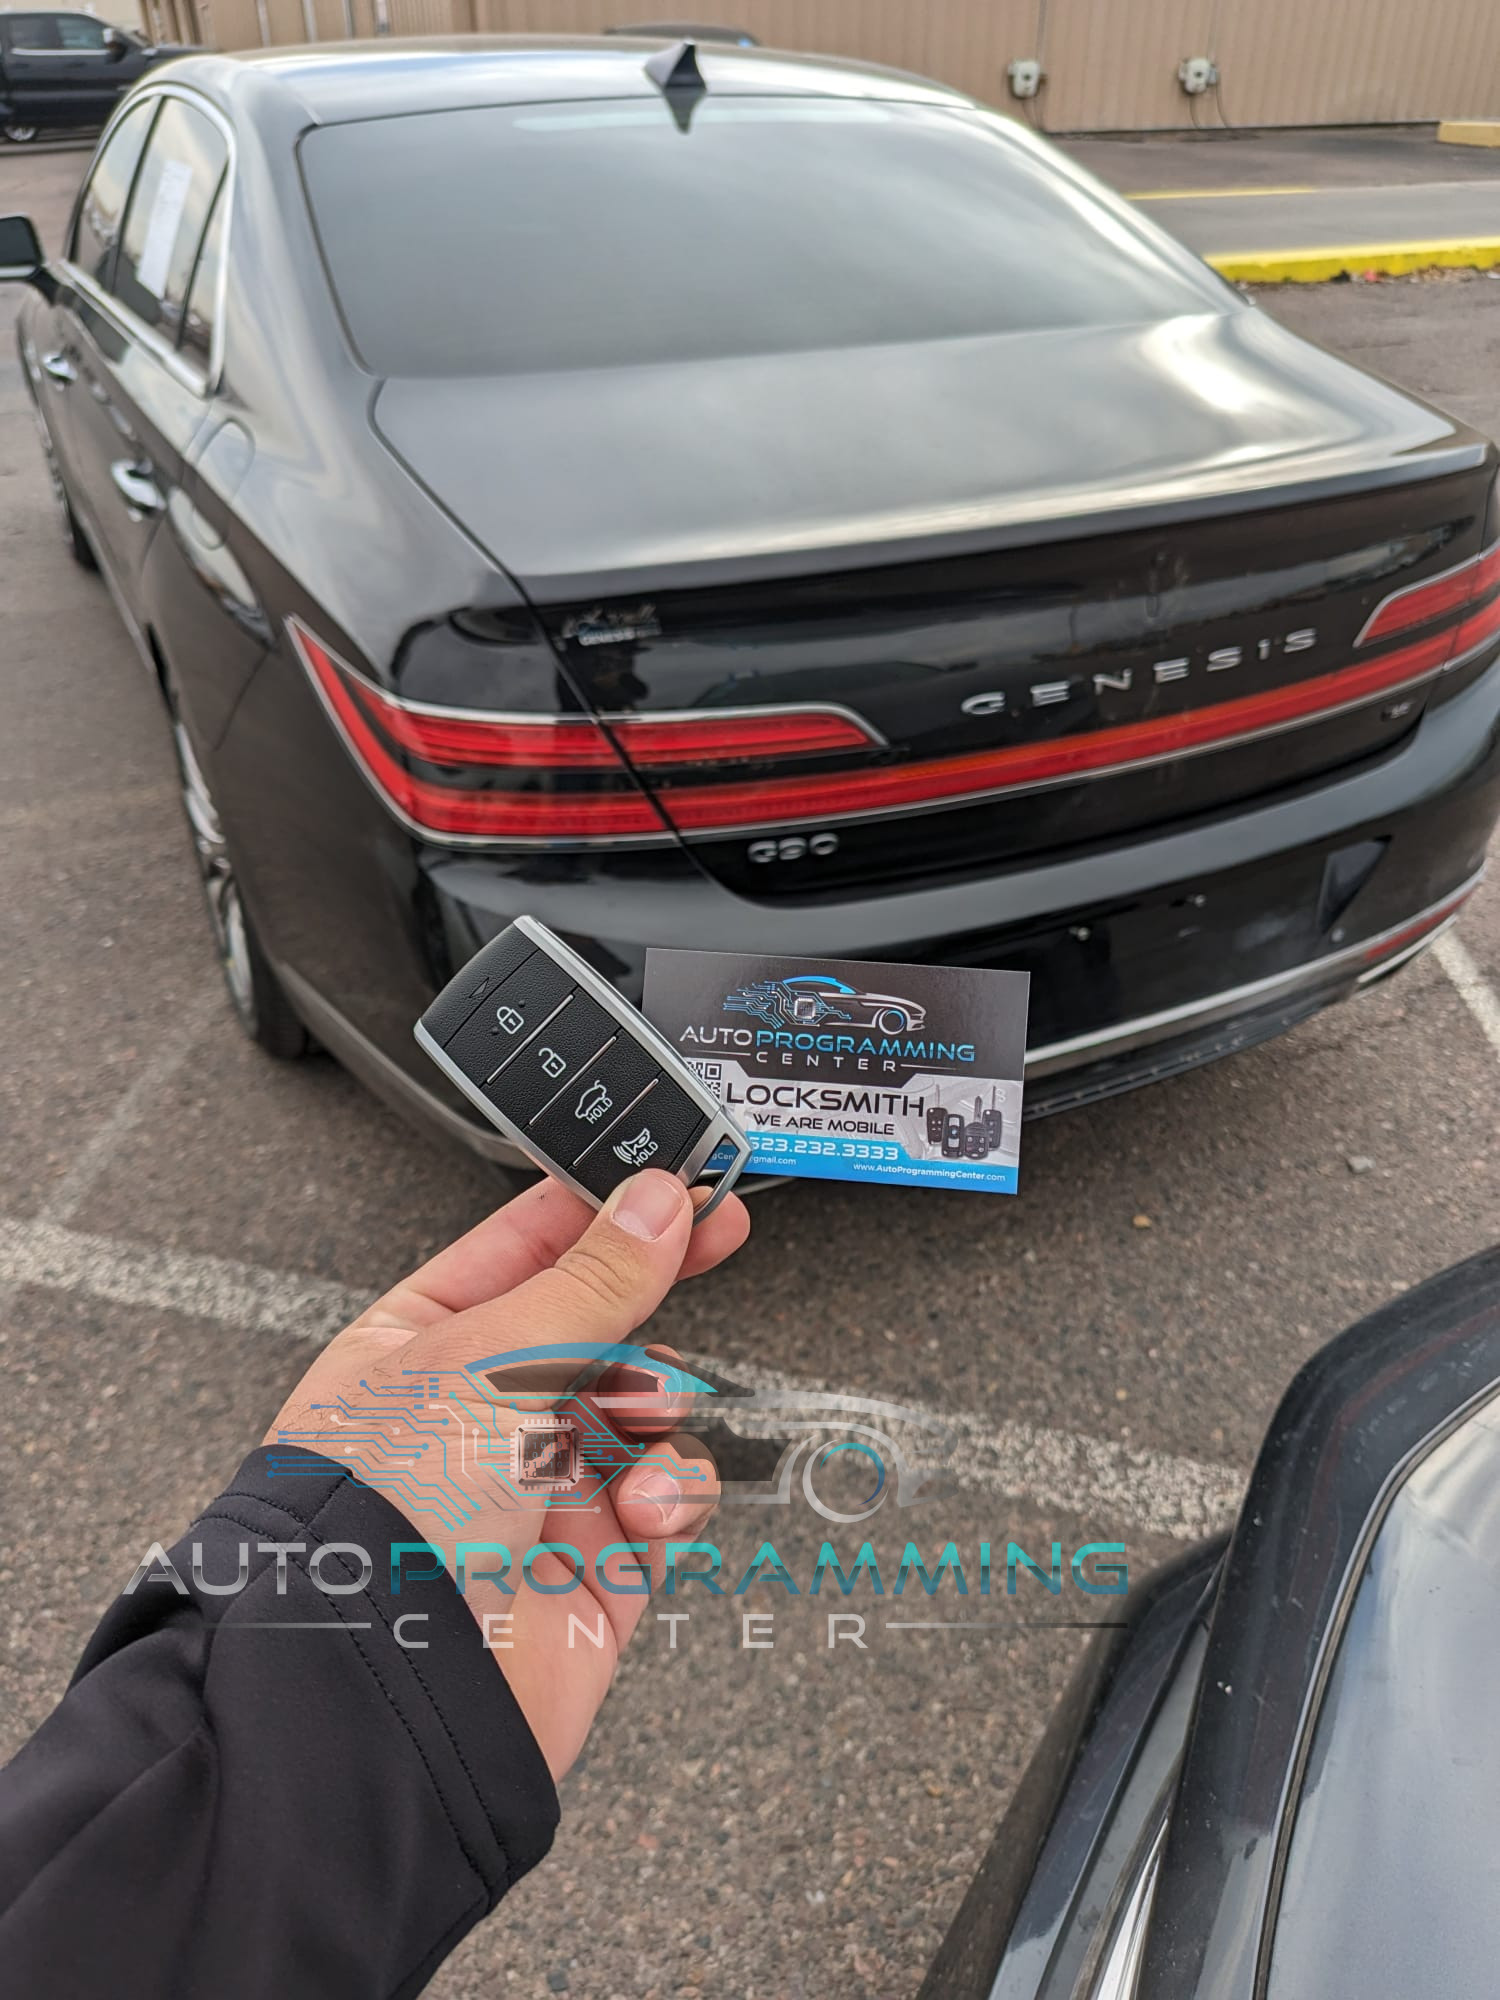 High-resolution image showcasing the sophisticated design and advanced features of a Genesis car key fob for effortless vehicle access and control.